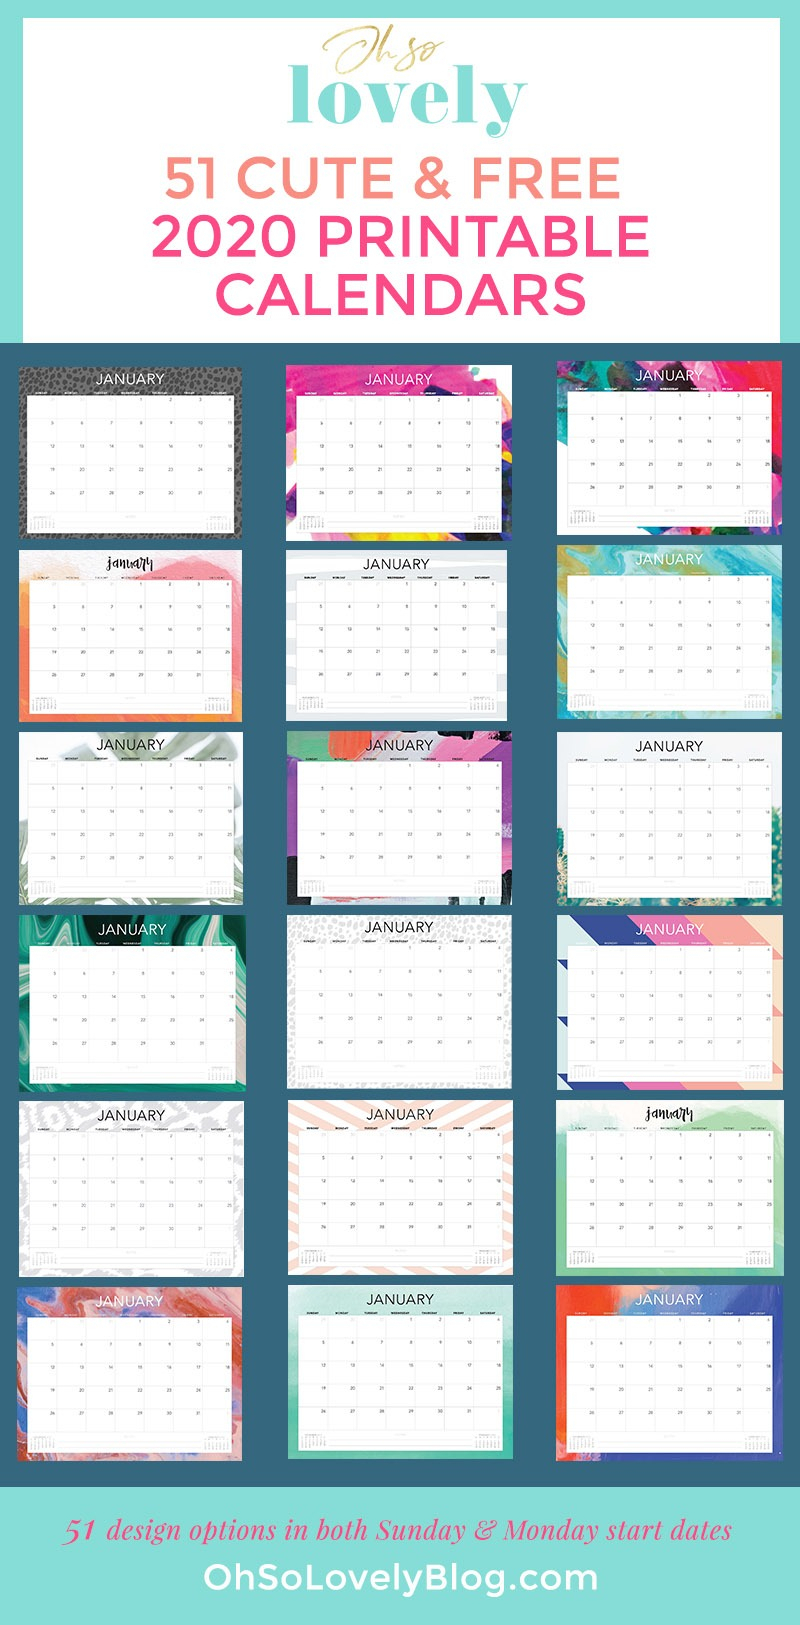 Free 2020 Printable Calendars – 51 Designs To Choose From